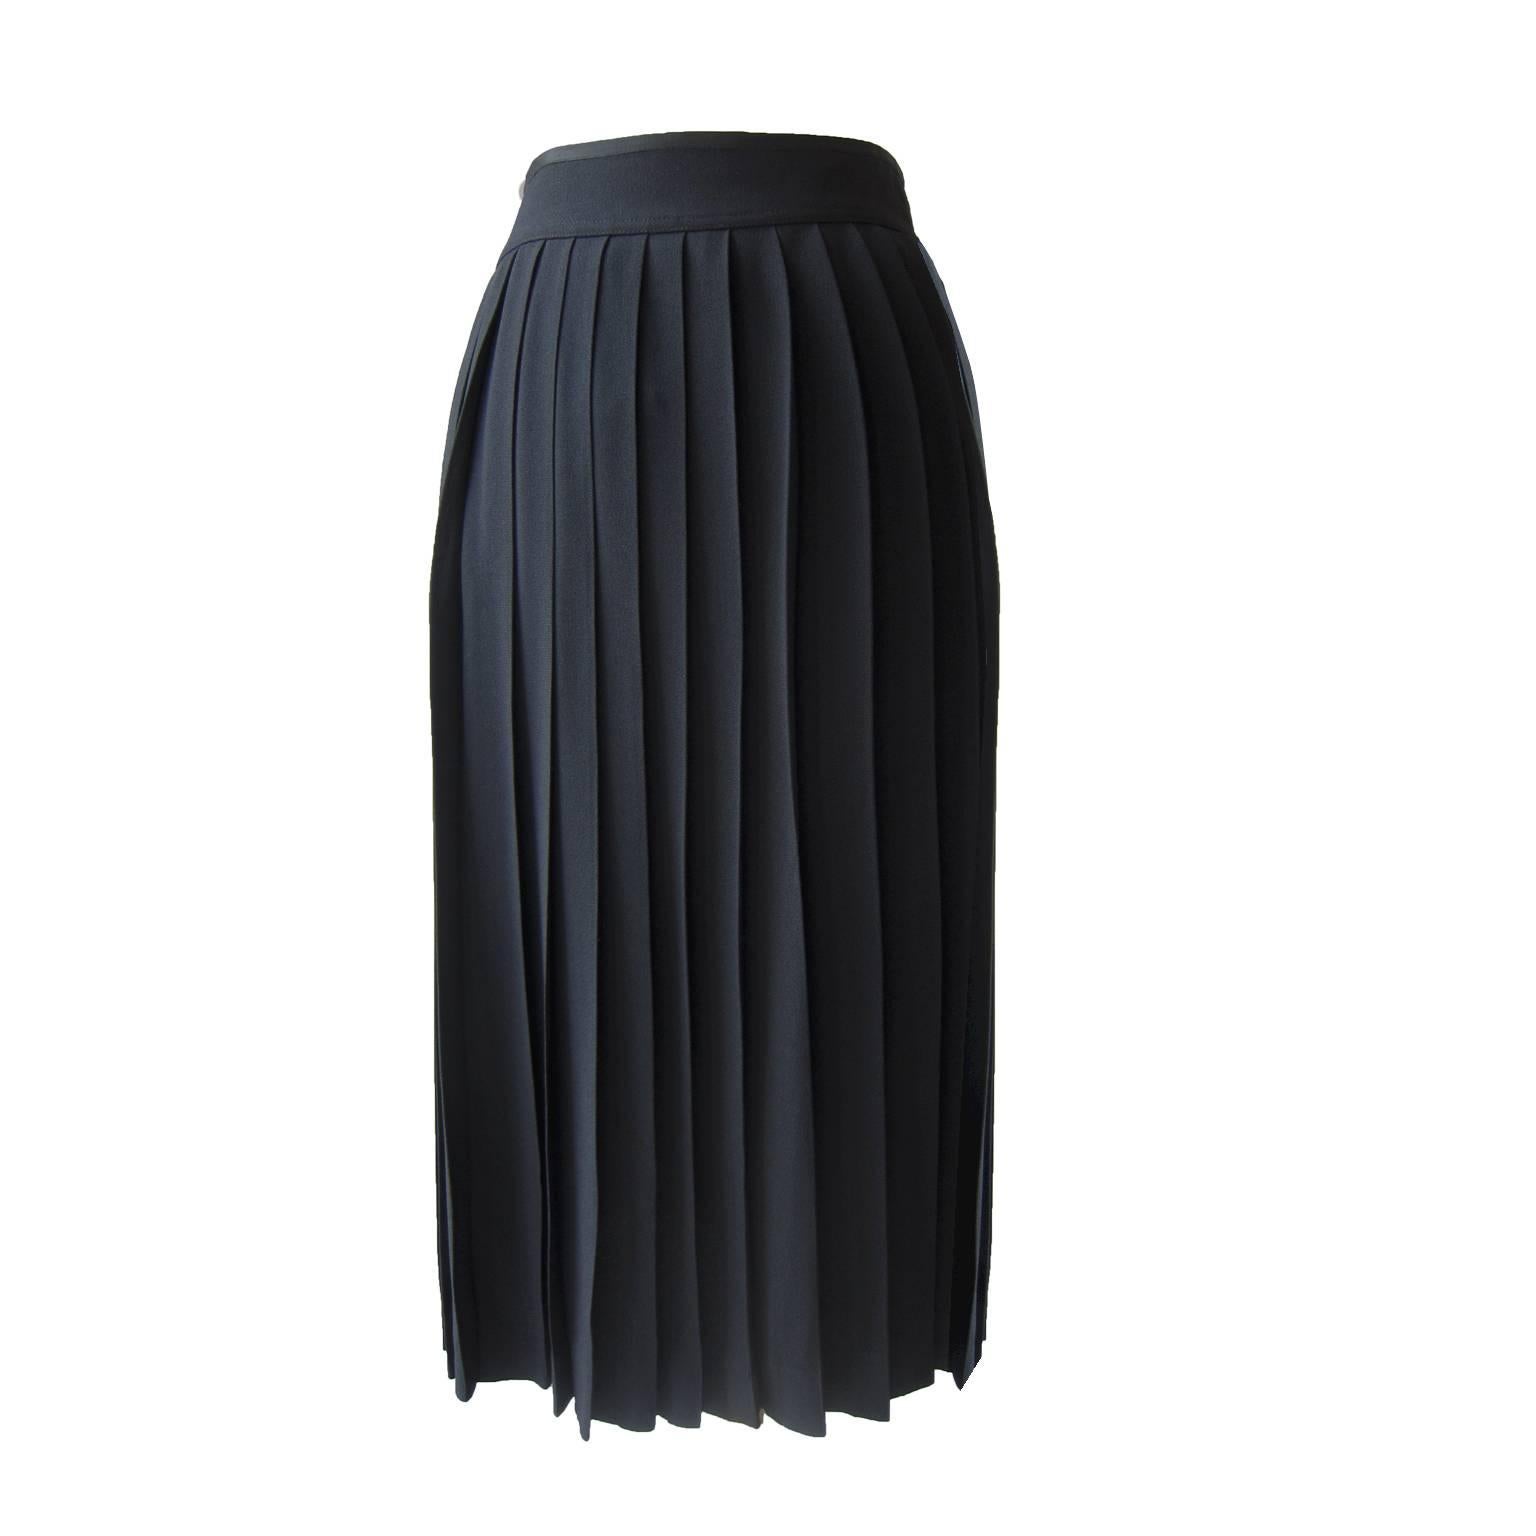 Yves Saint Laurent black pleated skirt from circa 1970s.
Hook fastening to the side with ribbed trim detail. 
Measurements :
Original size : 40 French ( Size M )
Waist : 71 cm
Length 72 cm

